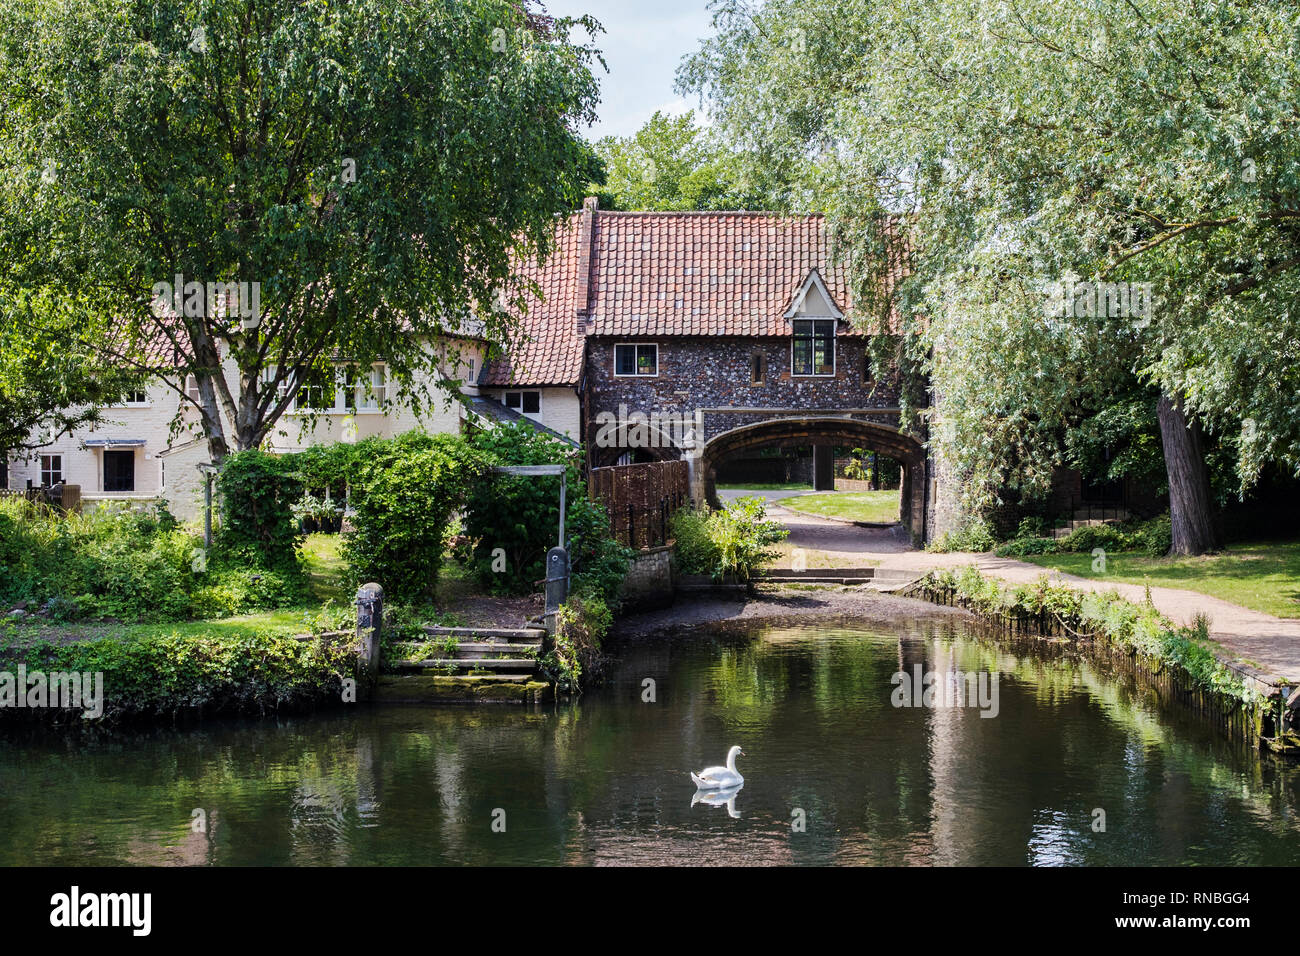 Exterior Of Pulls Ferry On River Wensum In Norwich Norfolk UK Stock Photo